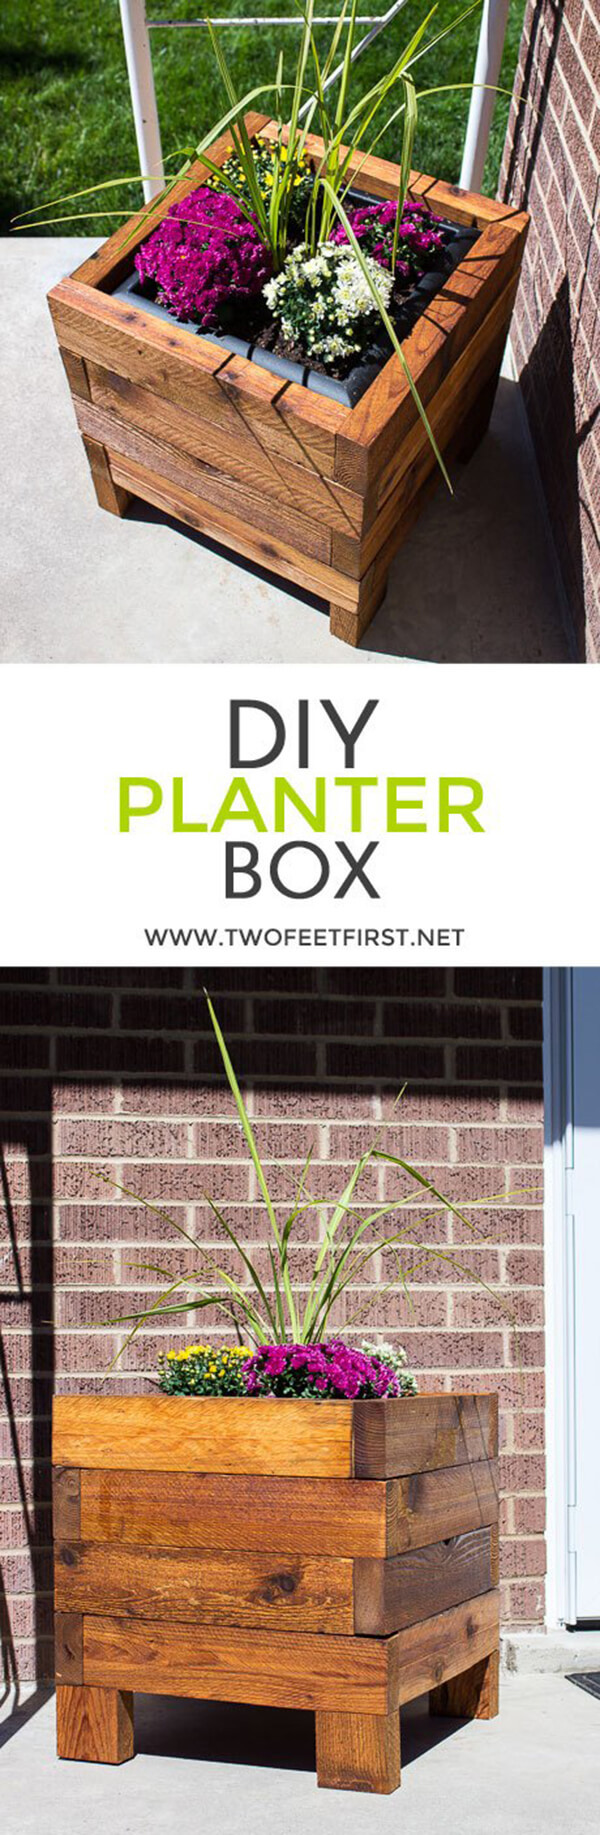 DIY Wood Flower Boxes
 32 Best DIY Pallet and Wood Planter Box Ideas and Designs